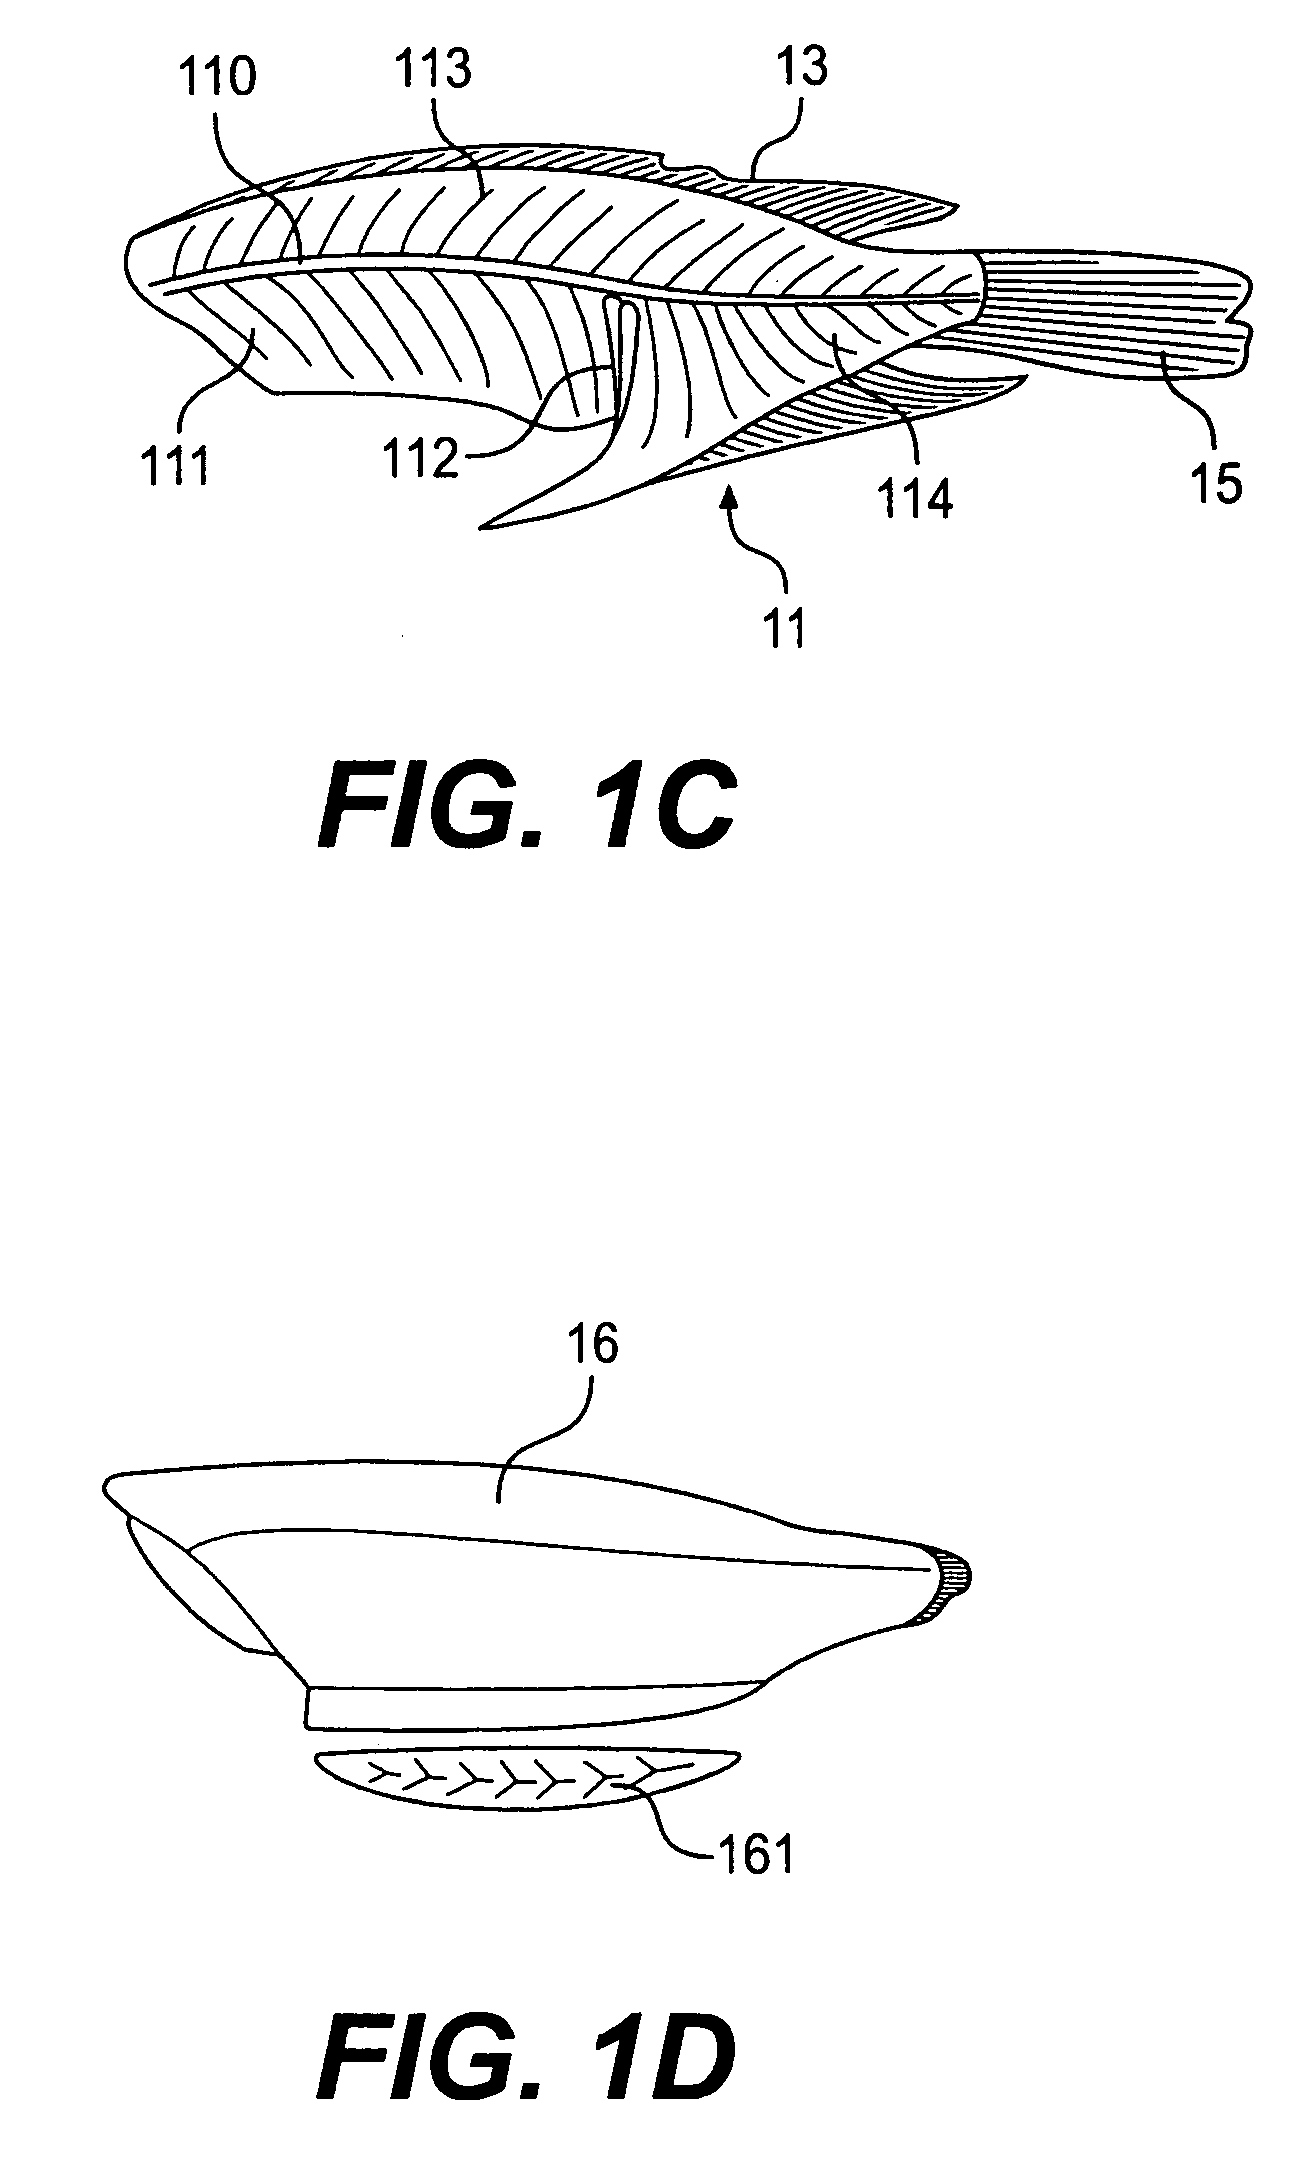 Method and device for filleting killed and headless fish, the abdominal cavity of which is opened up